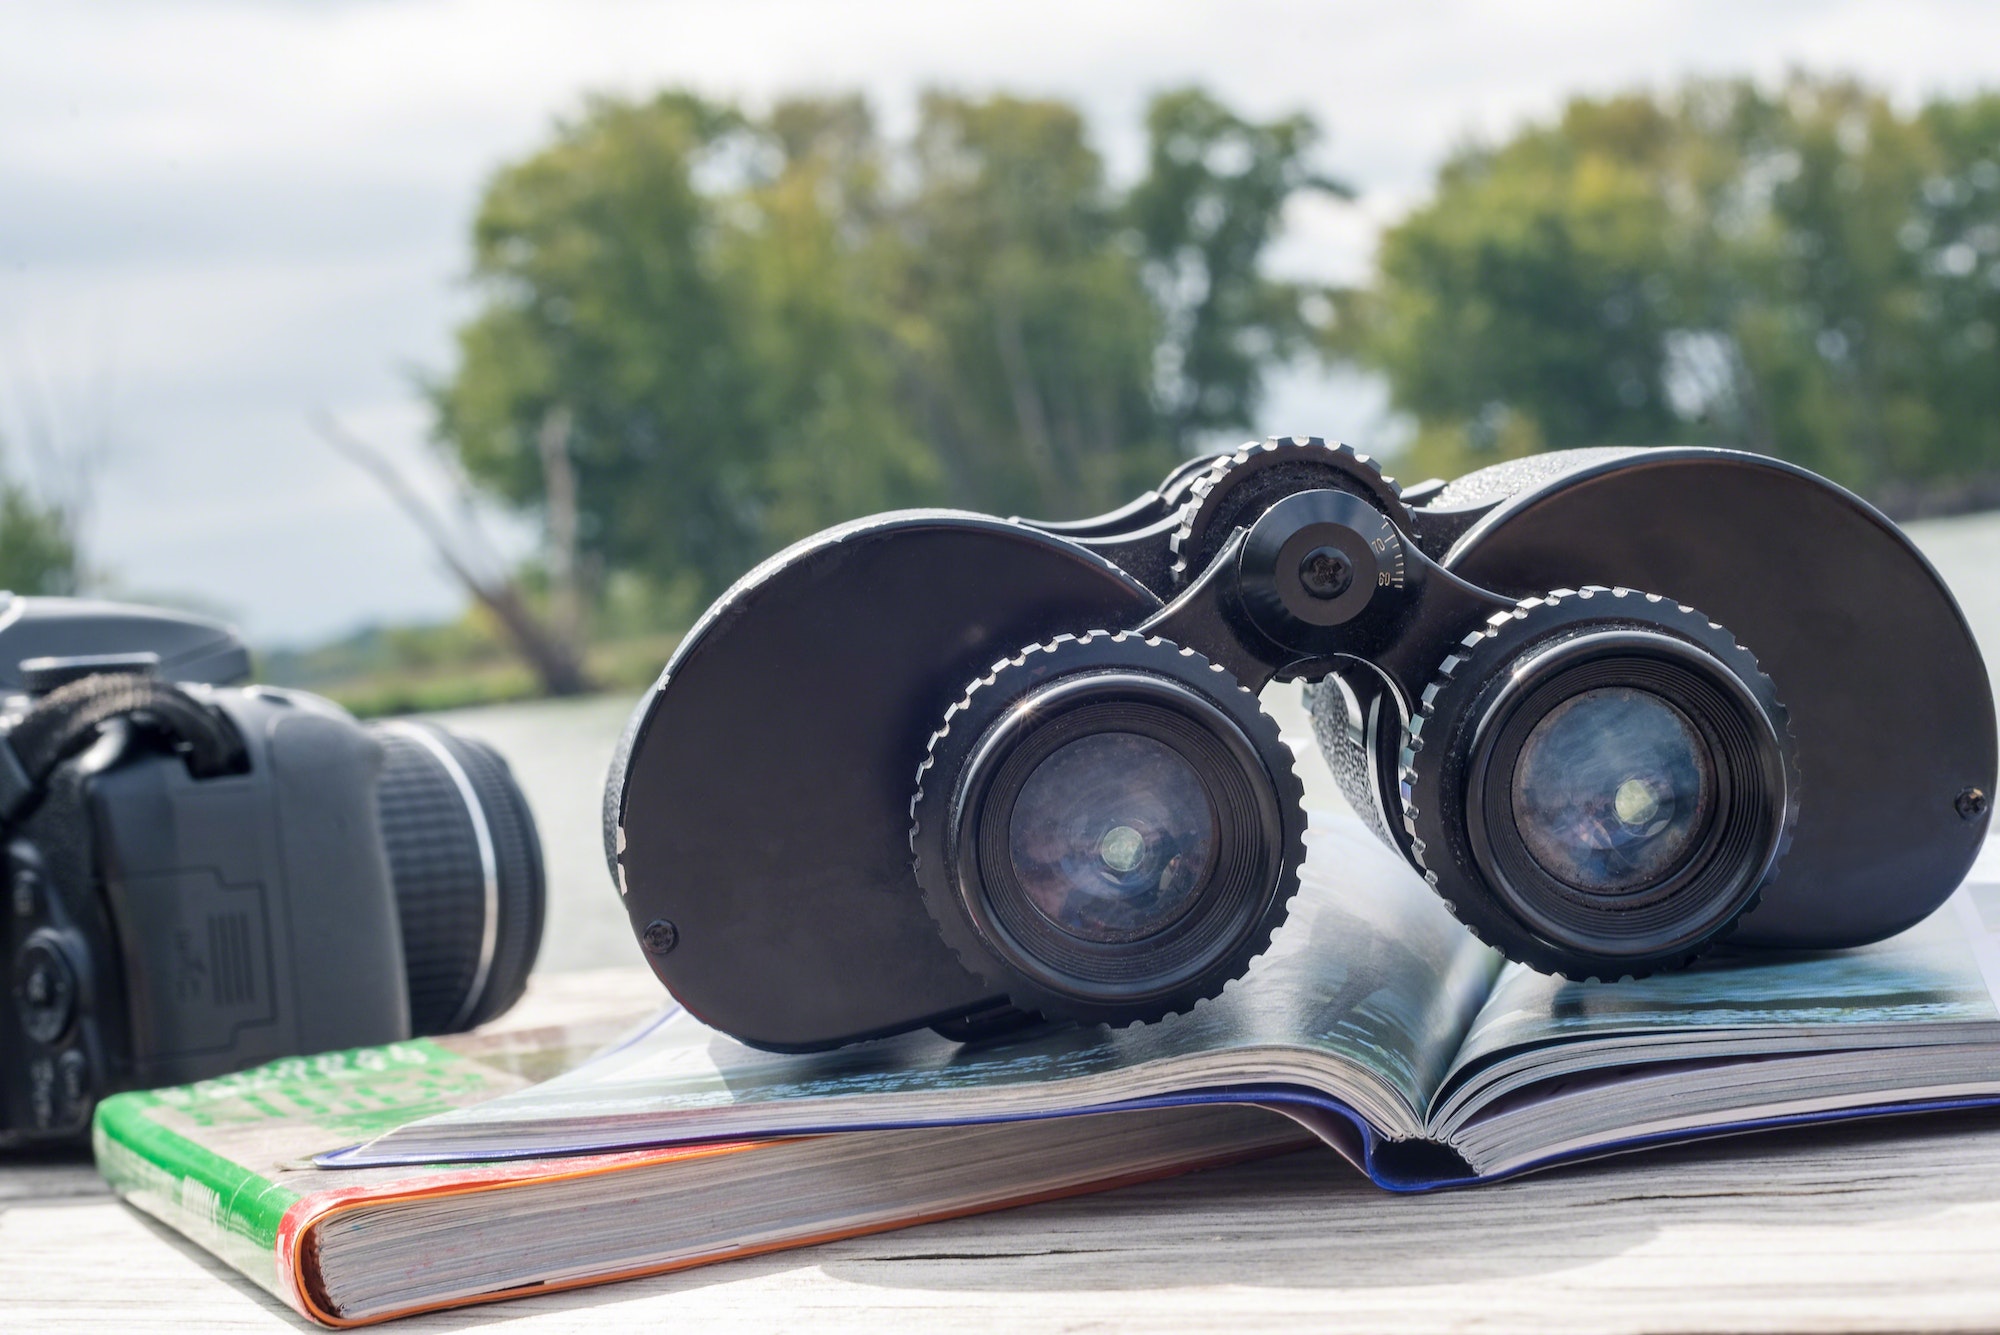 Binoculars and field guides for wildlife viewing